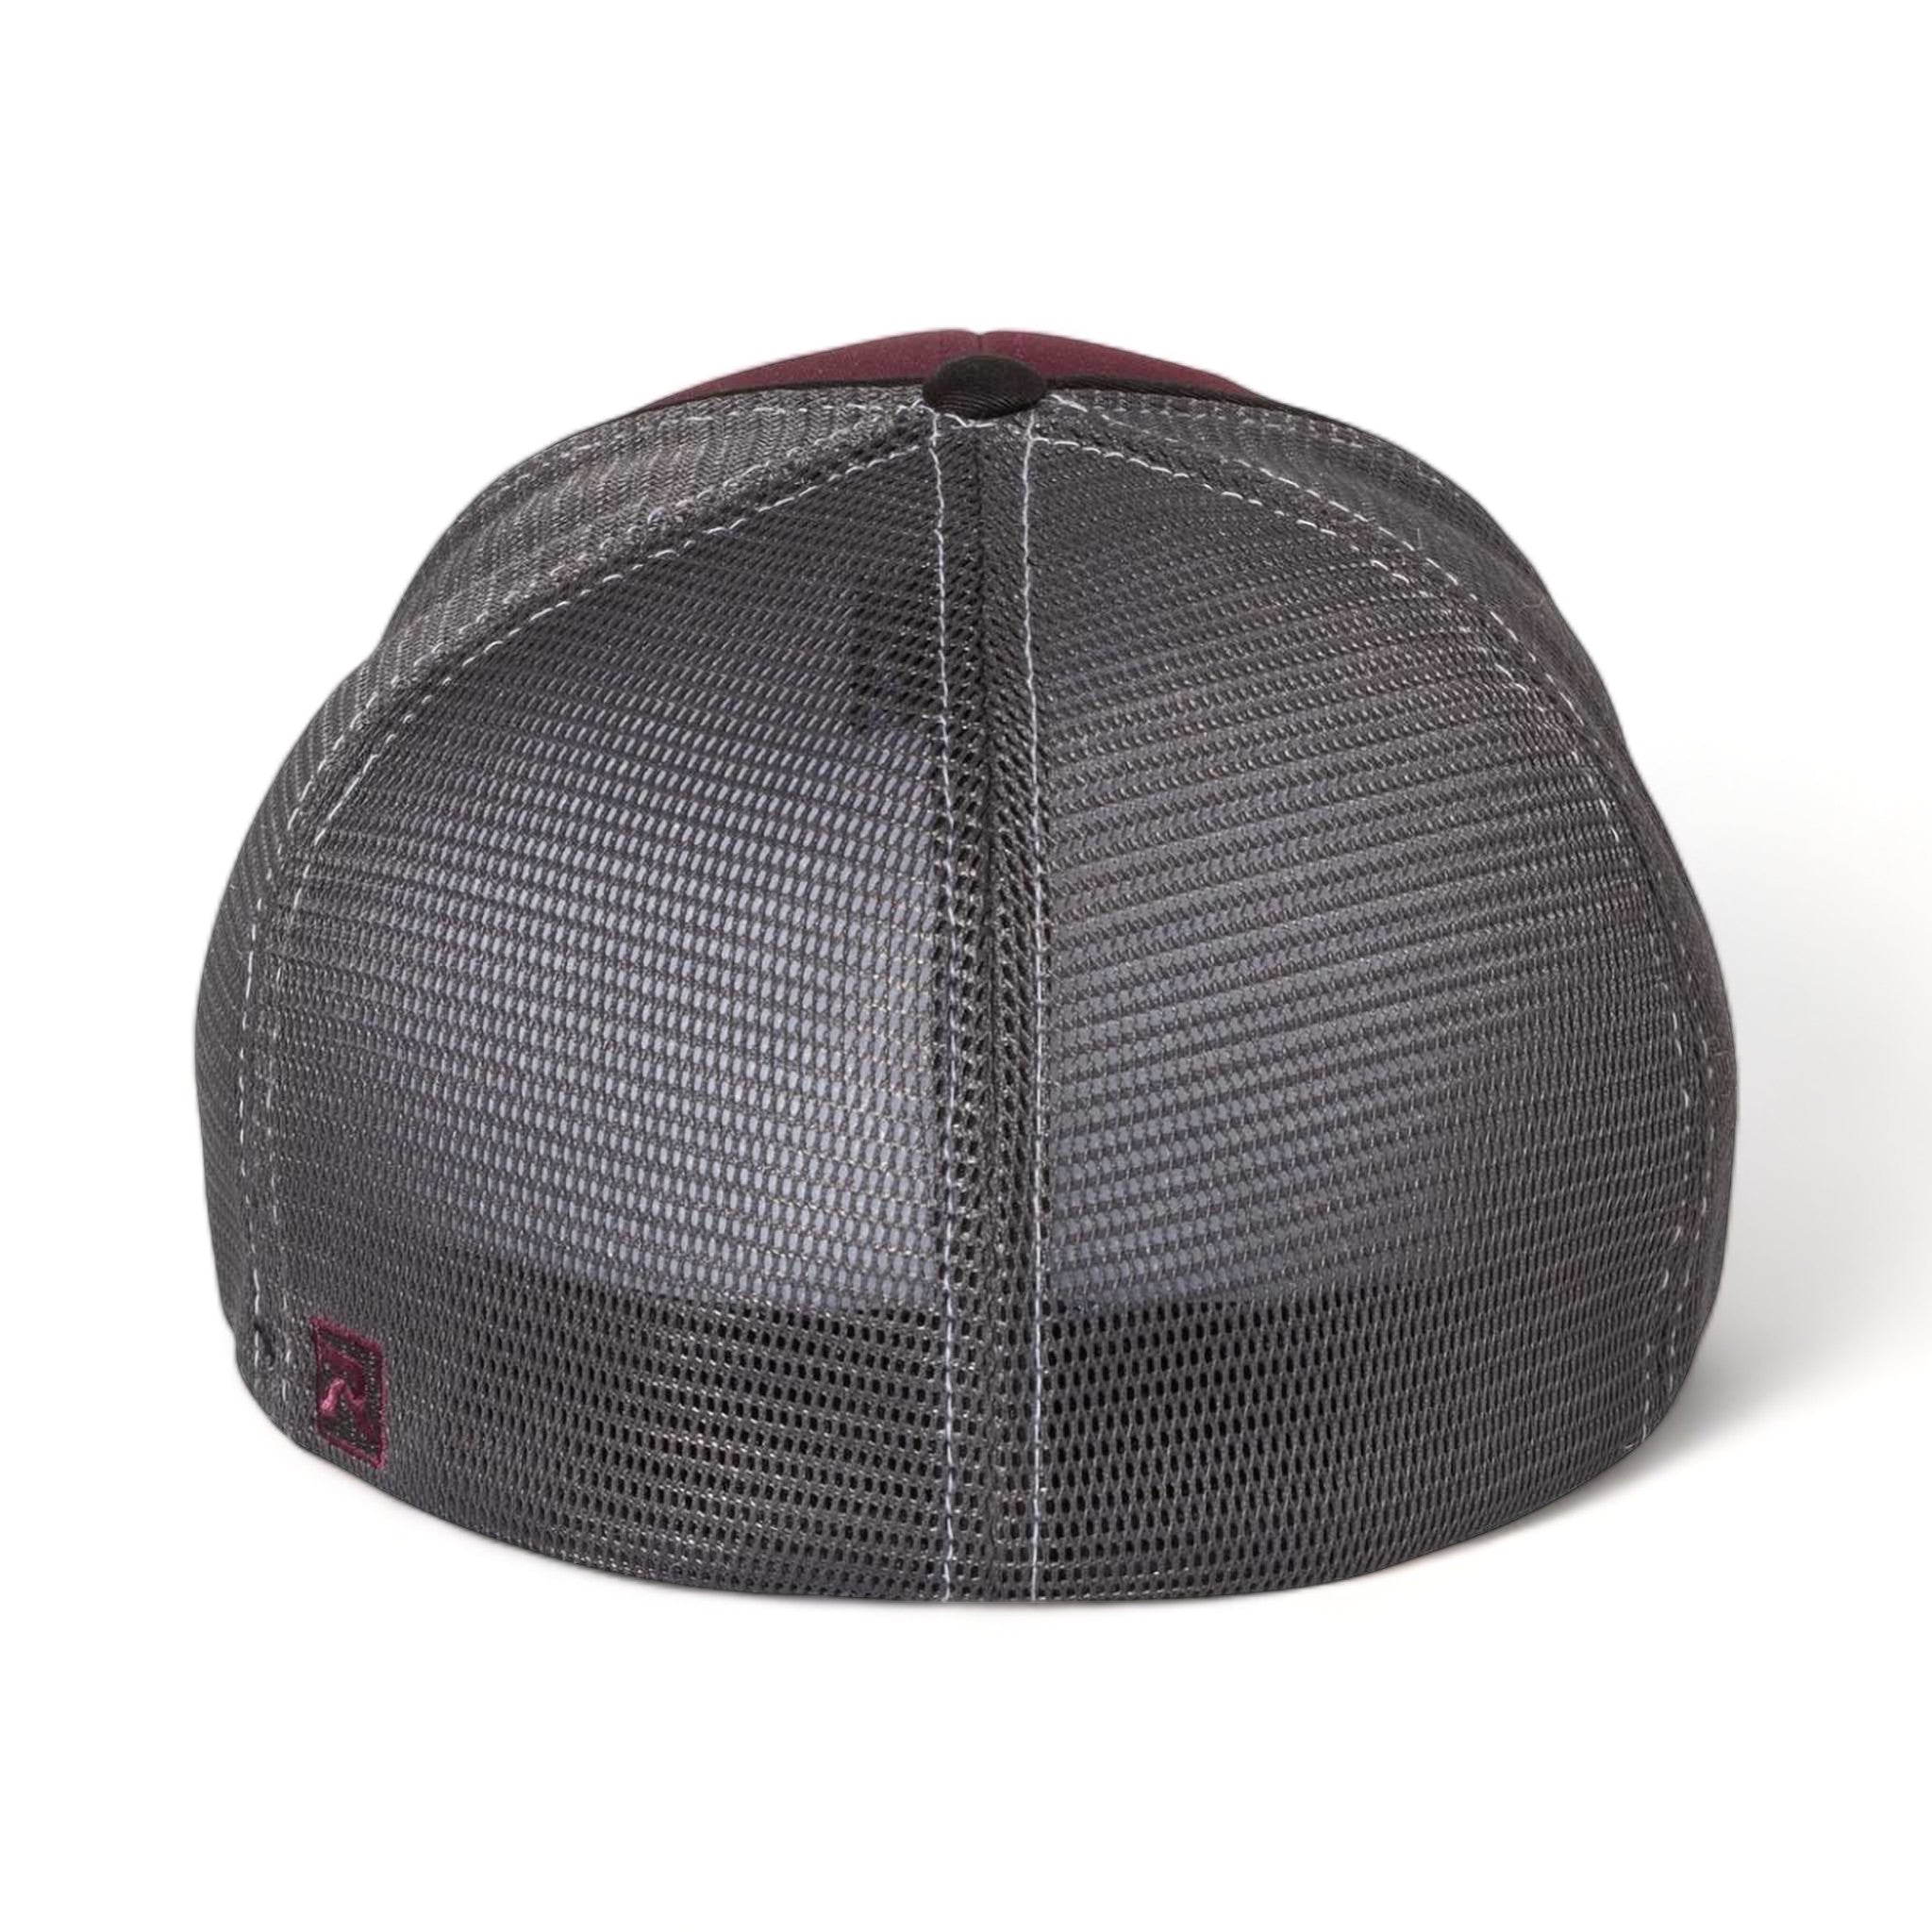 Back view of Richardson 172 custom hat in maroon, charcoal and black tri